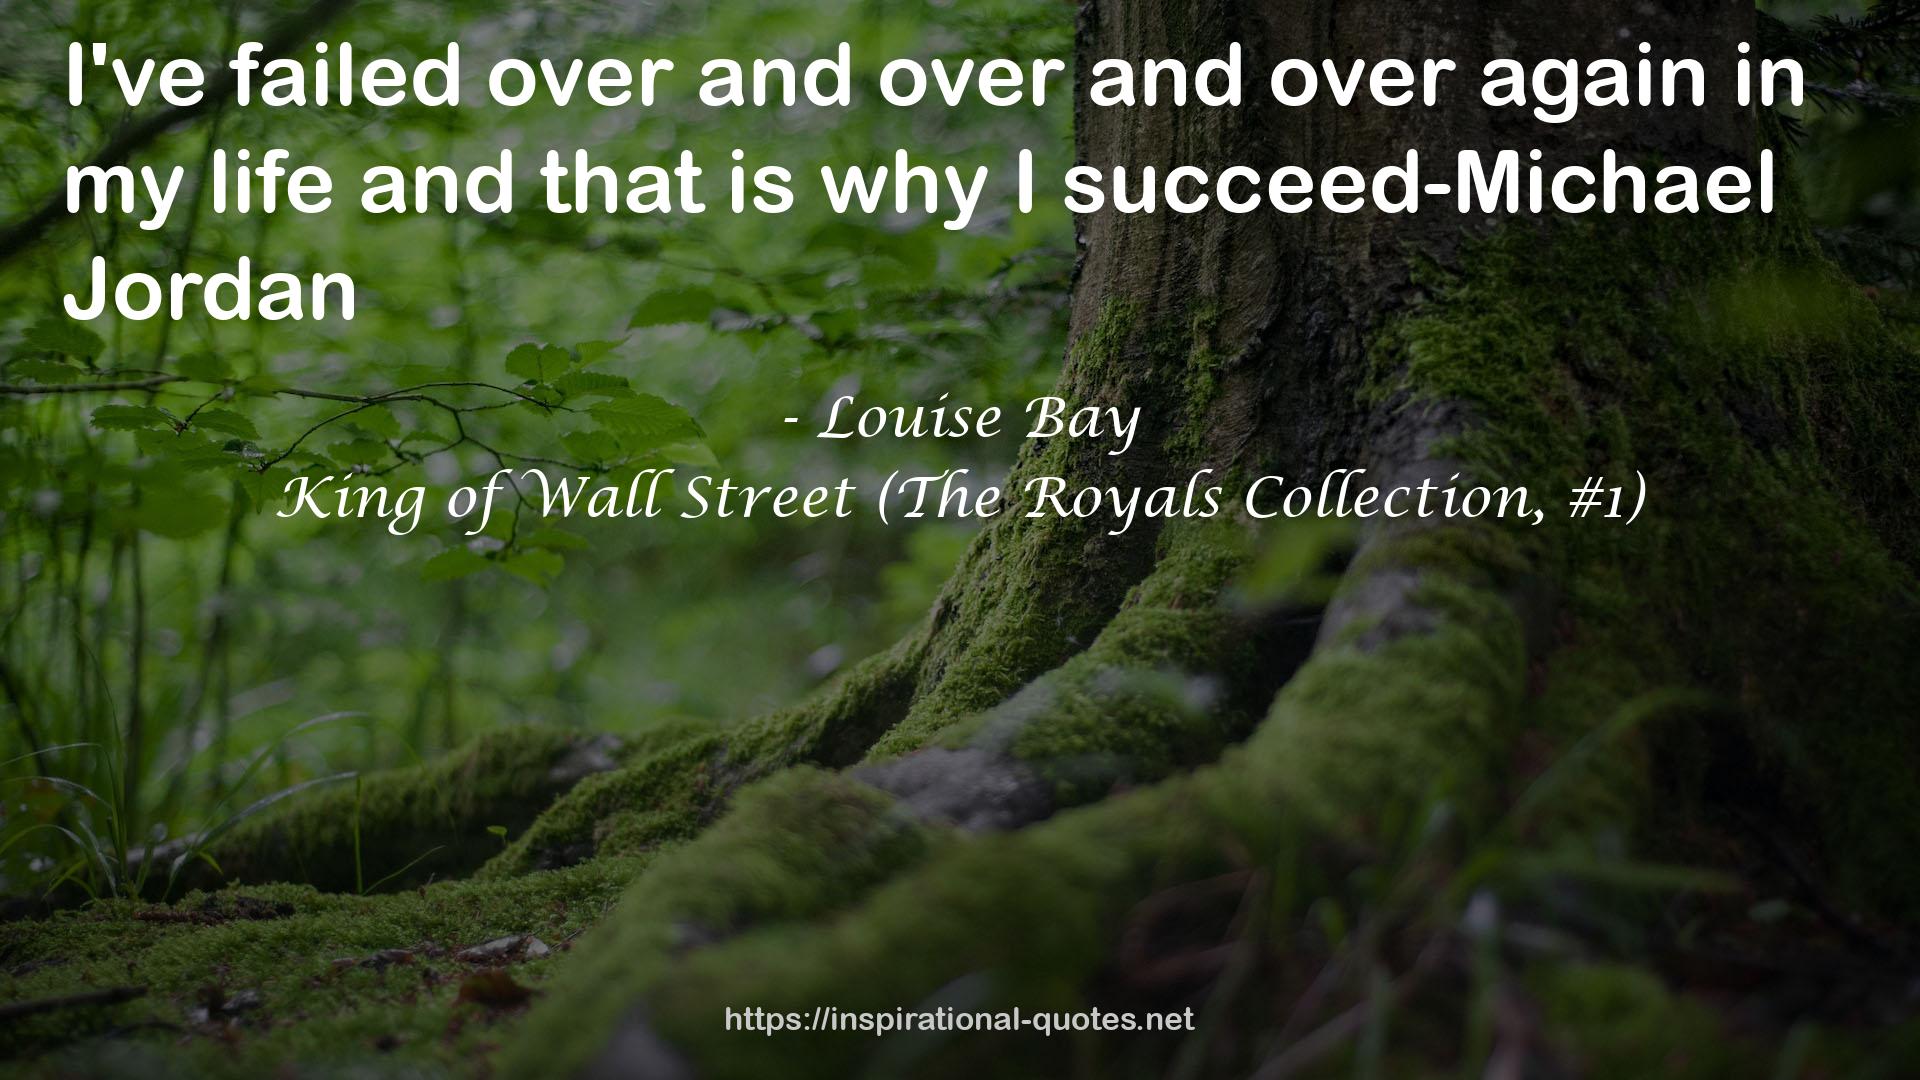 King of Wall Street (The Royals Collection, #1) QUOTES